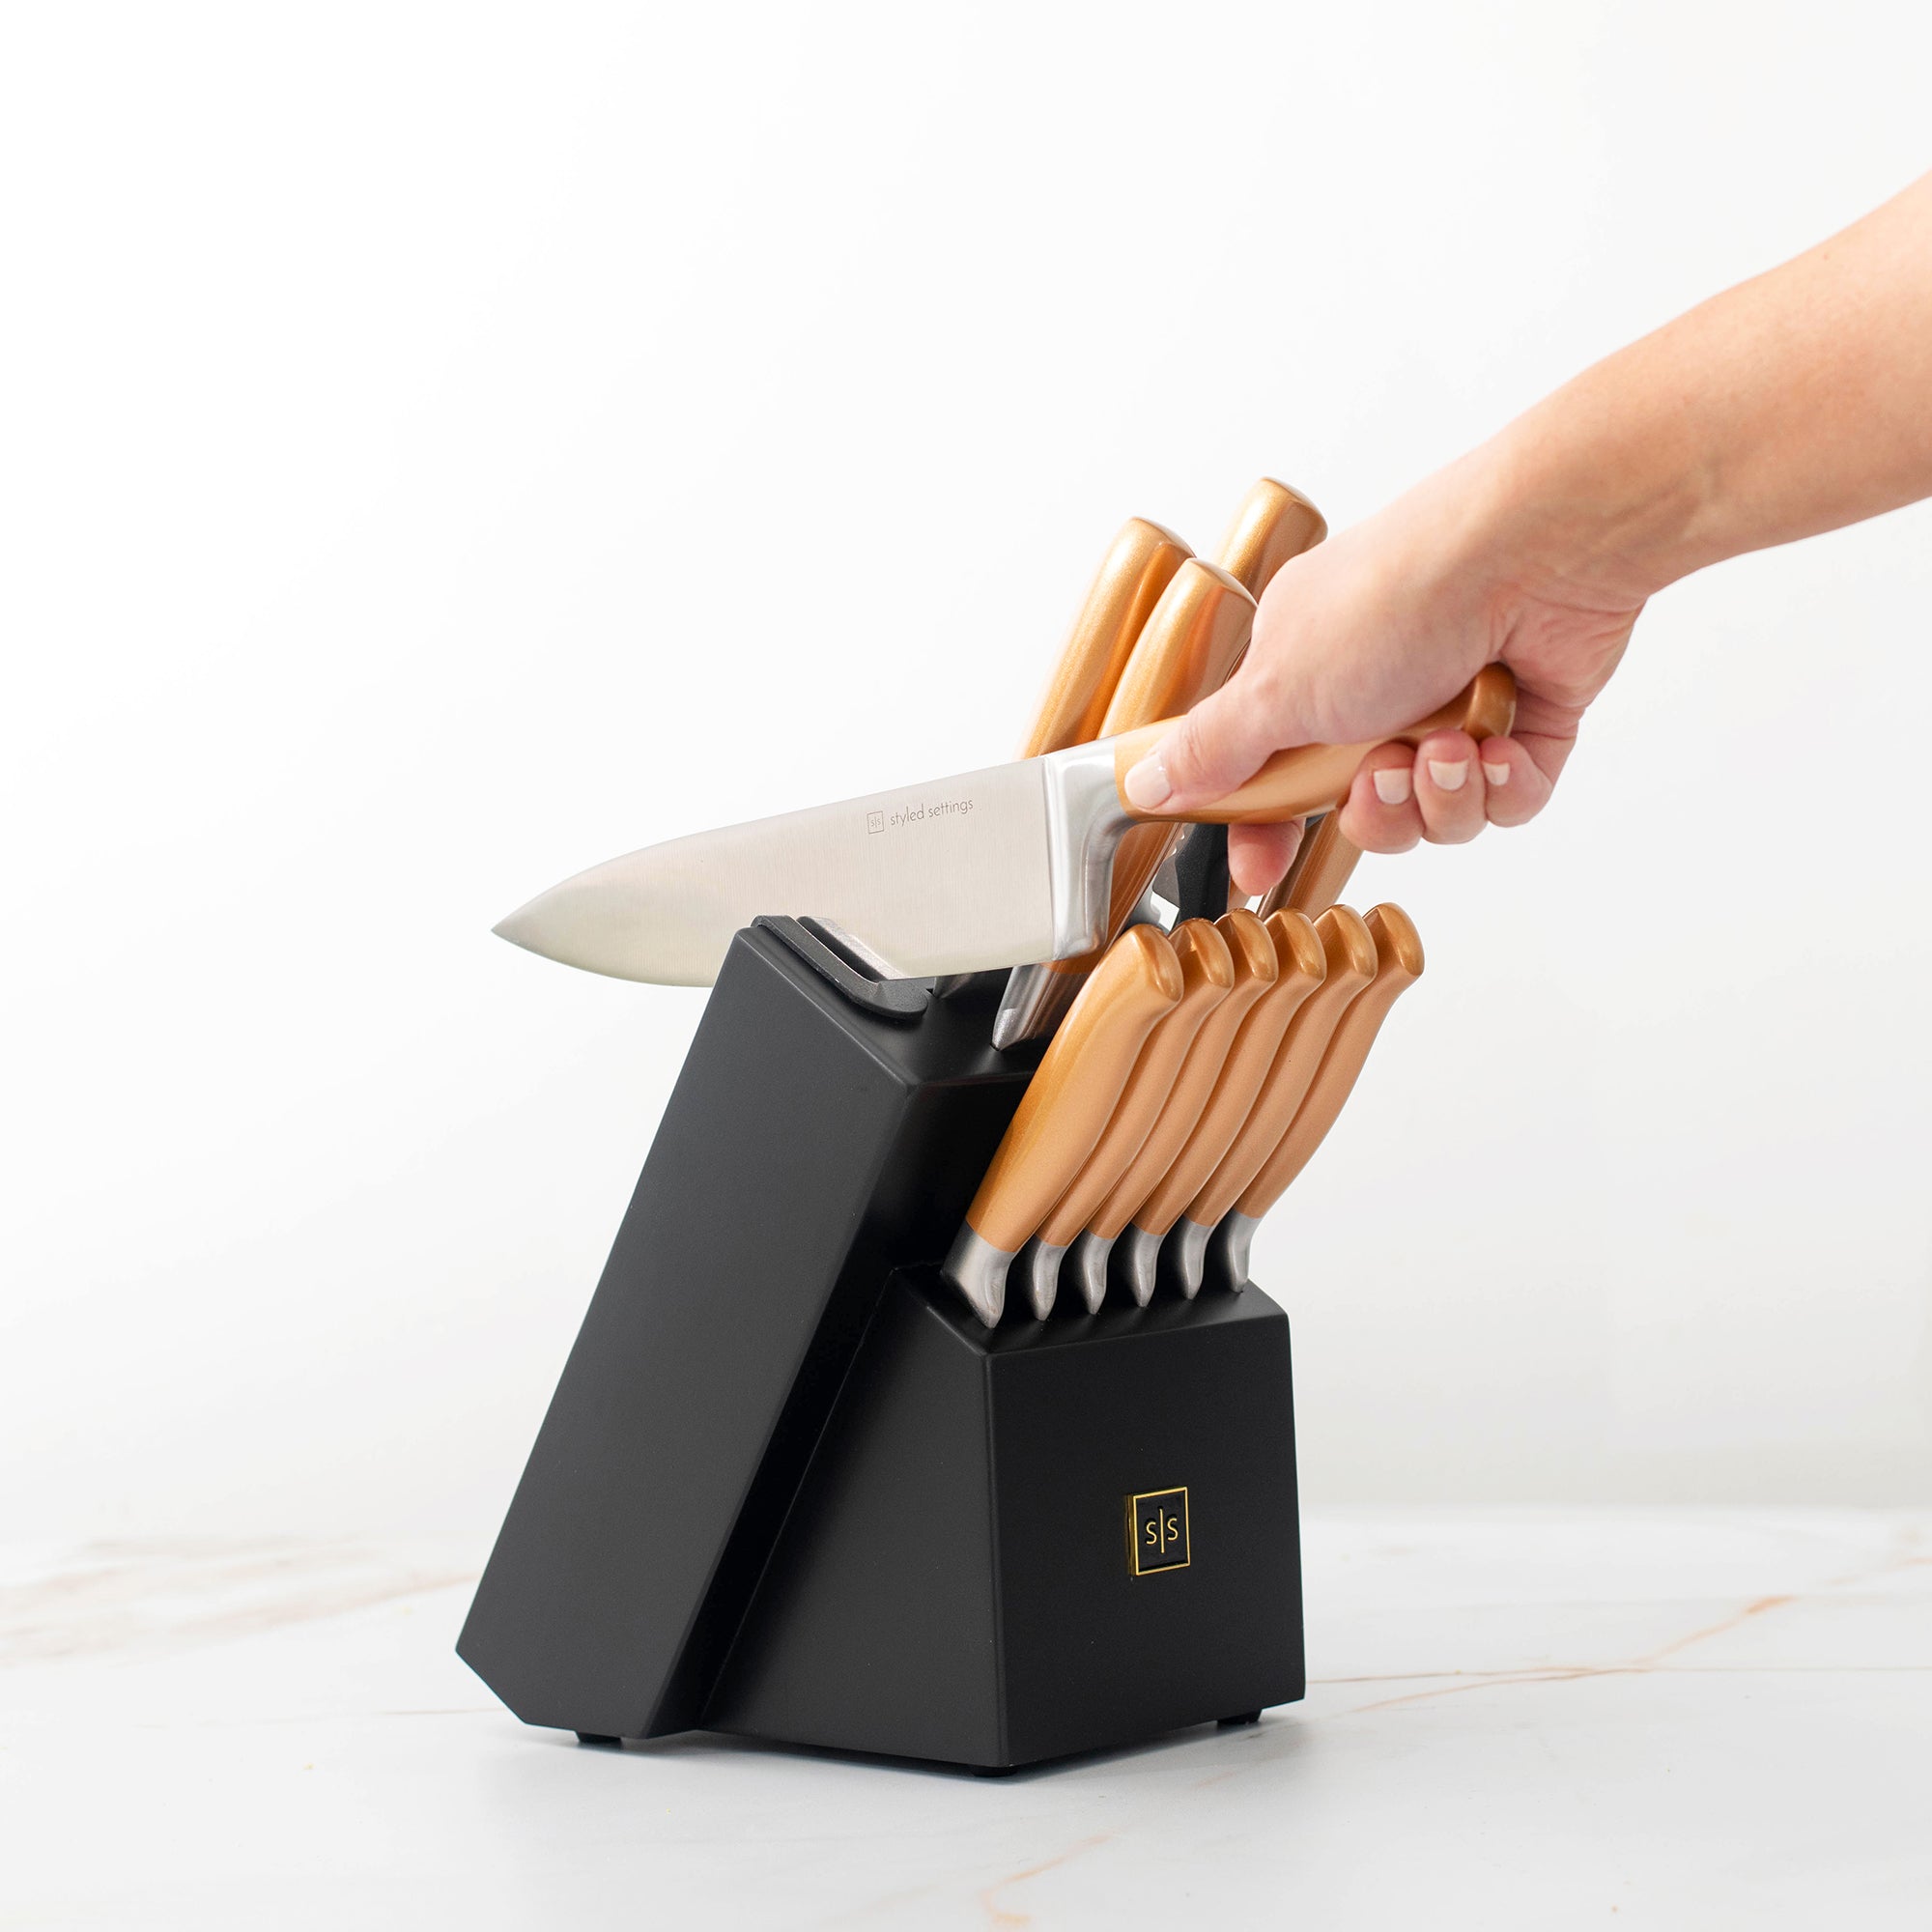 Styled Settings Gold Knife Set with Self Sharpening Knife Block 